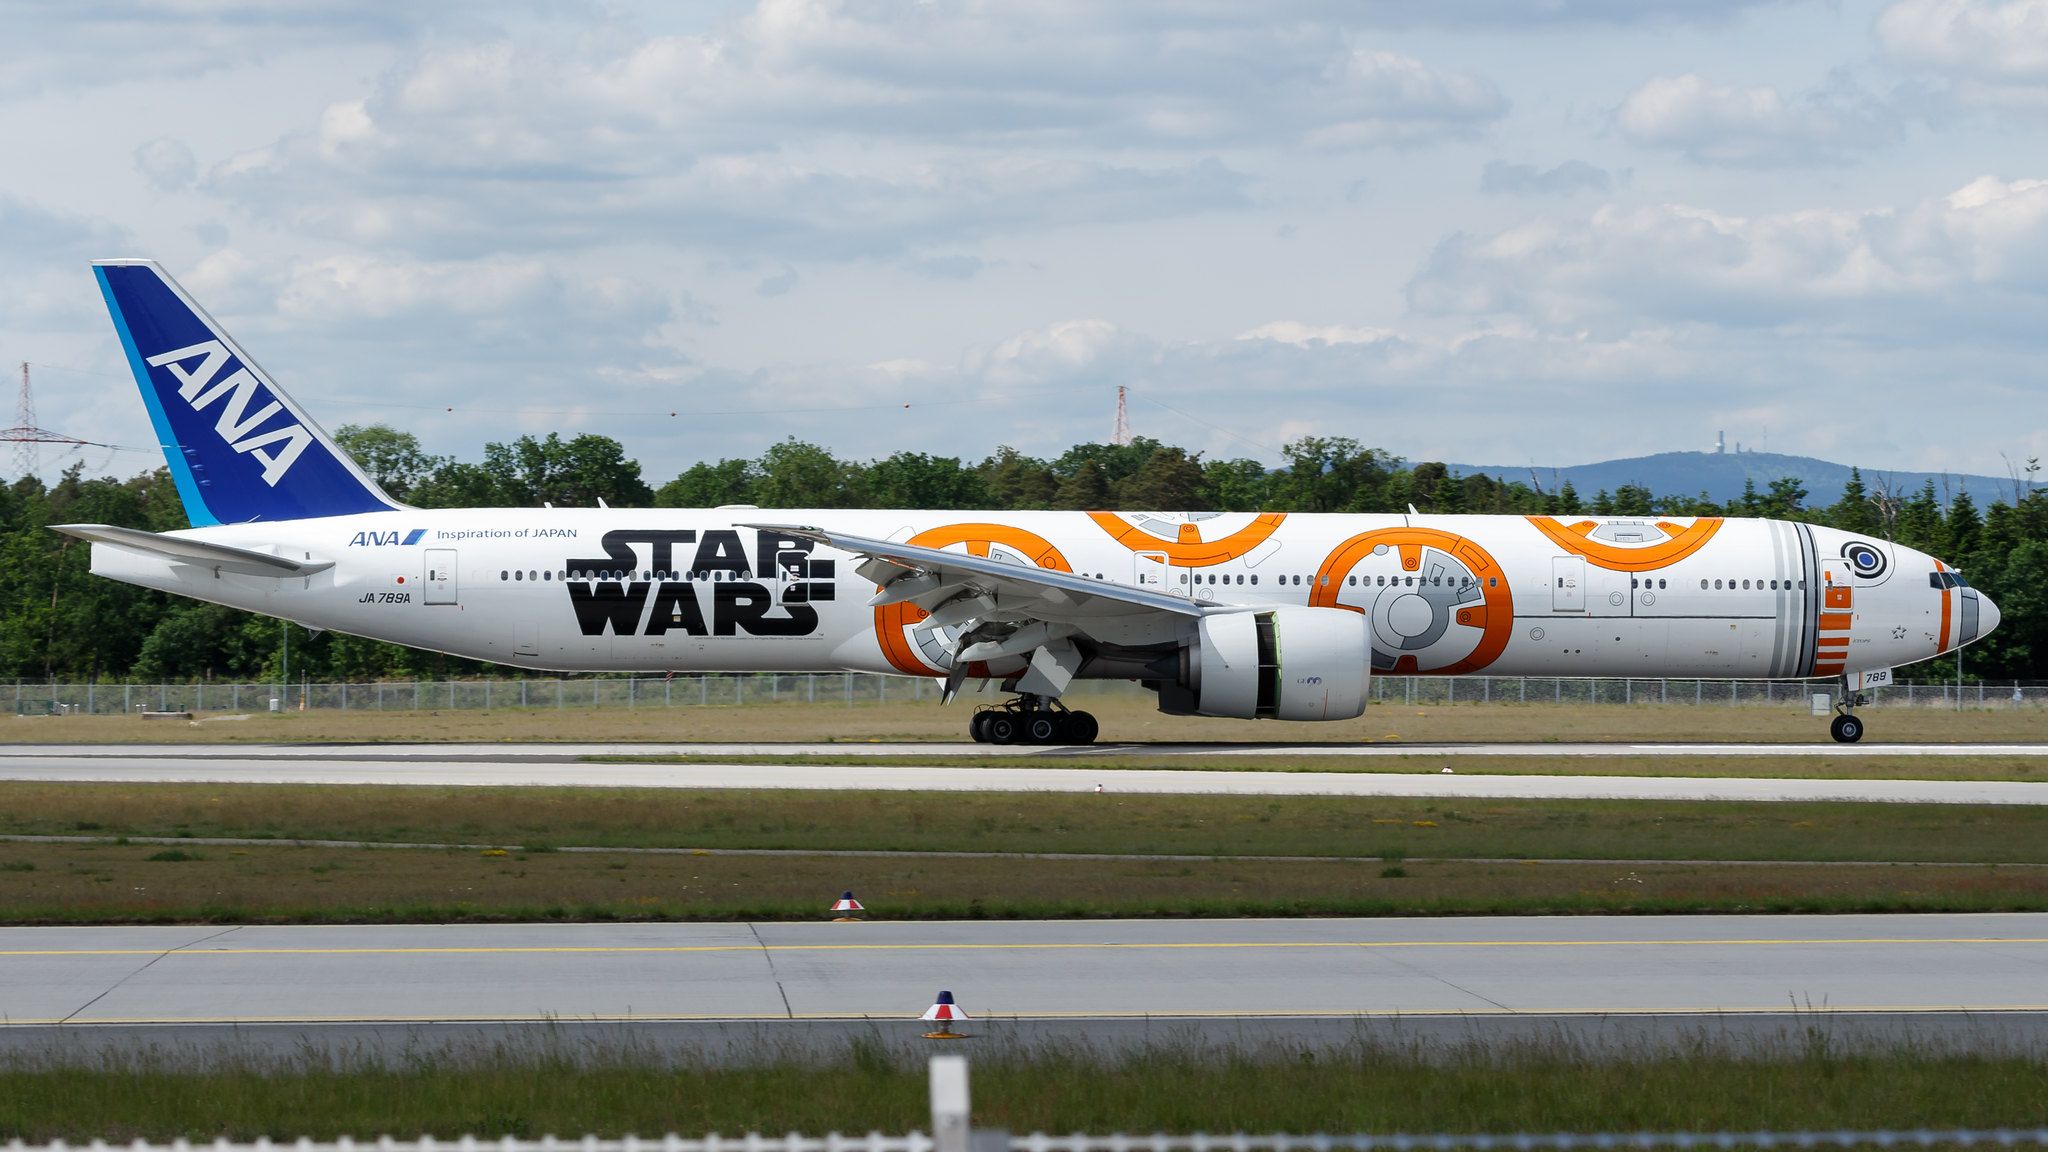 ANA To Remove Special Boeing 777 Star Wars BB-8 Livery